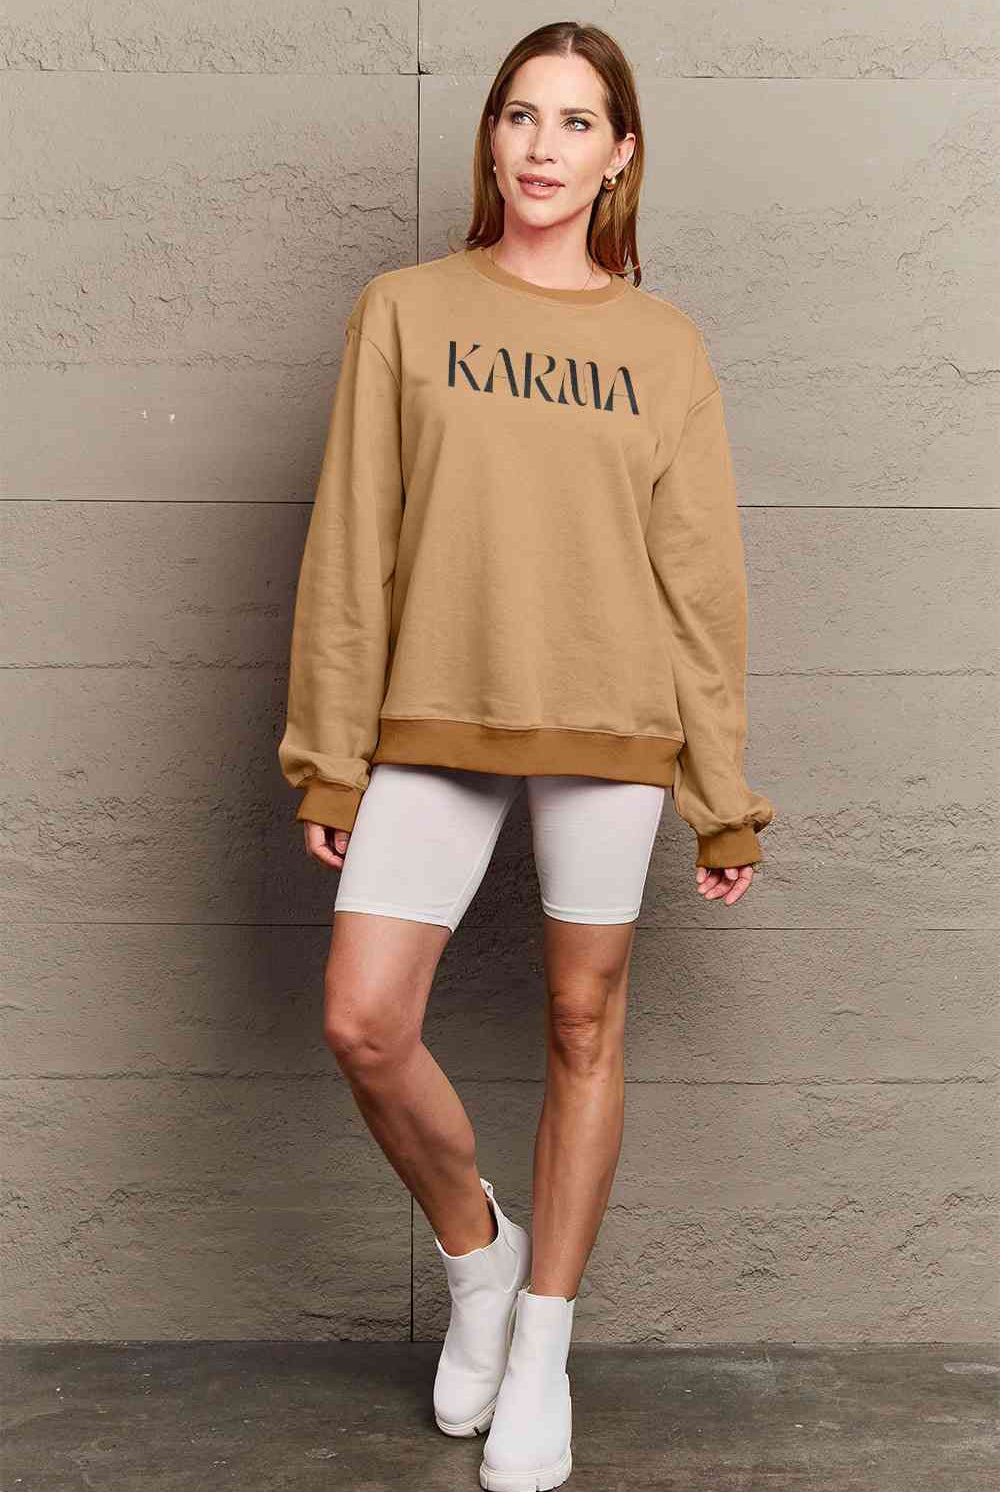 Simply Love Full Size KARMA Graphic Sweatshirt - GemThreads Boutique